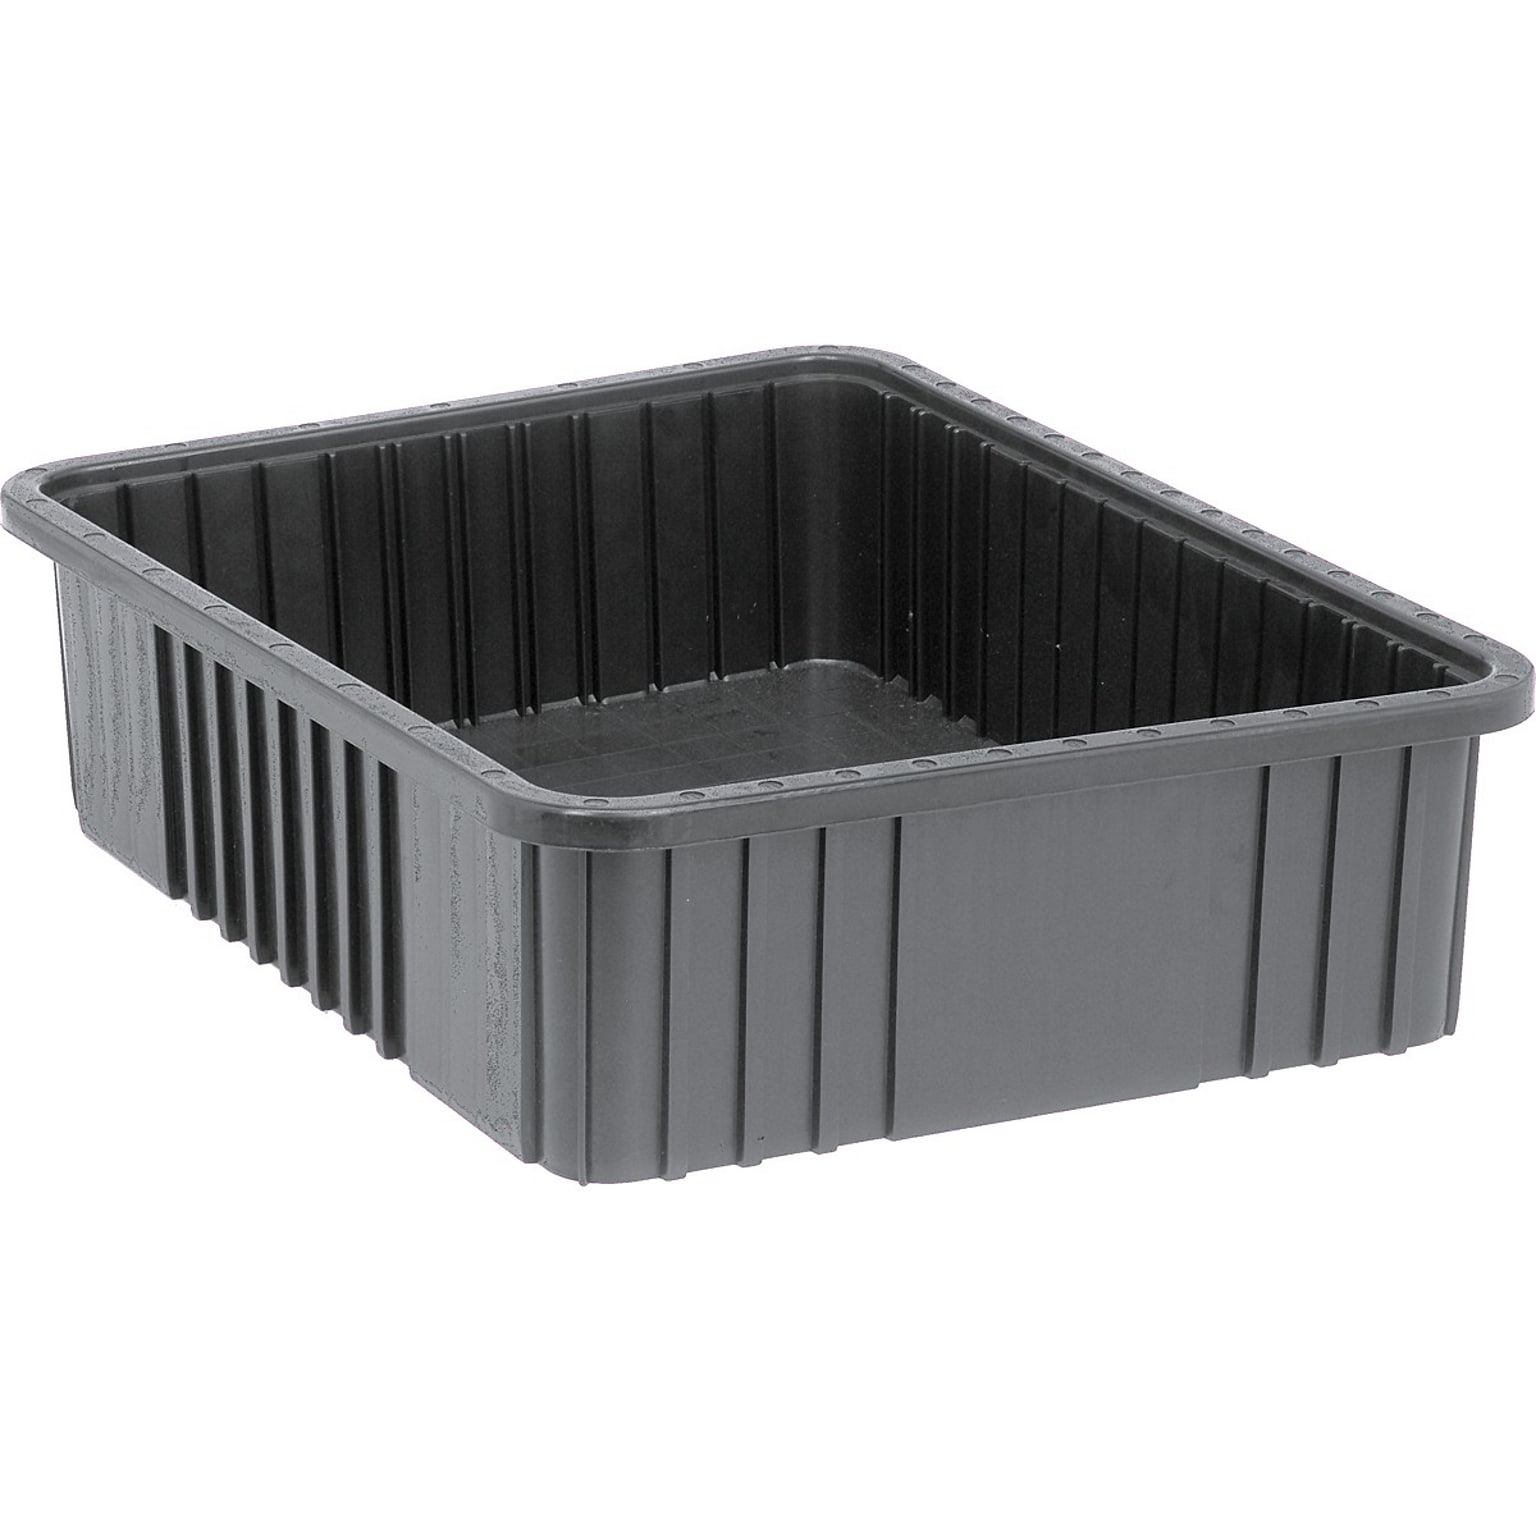 Quantum Storage Systems Dividable Grid Container, 22-1/2L x 17-1/2W x 6H, Gray, 3/Pack (DG93060GYCS)